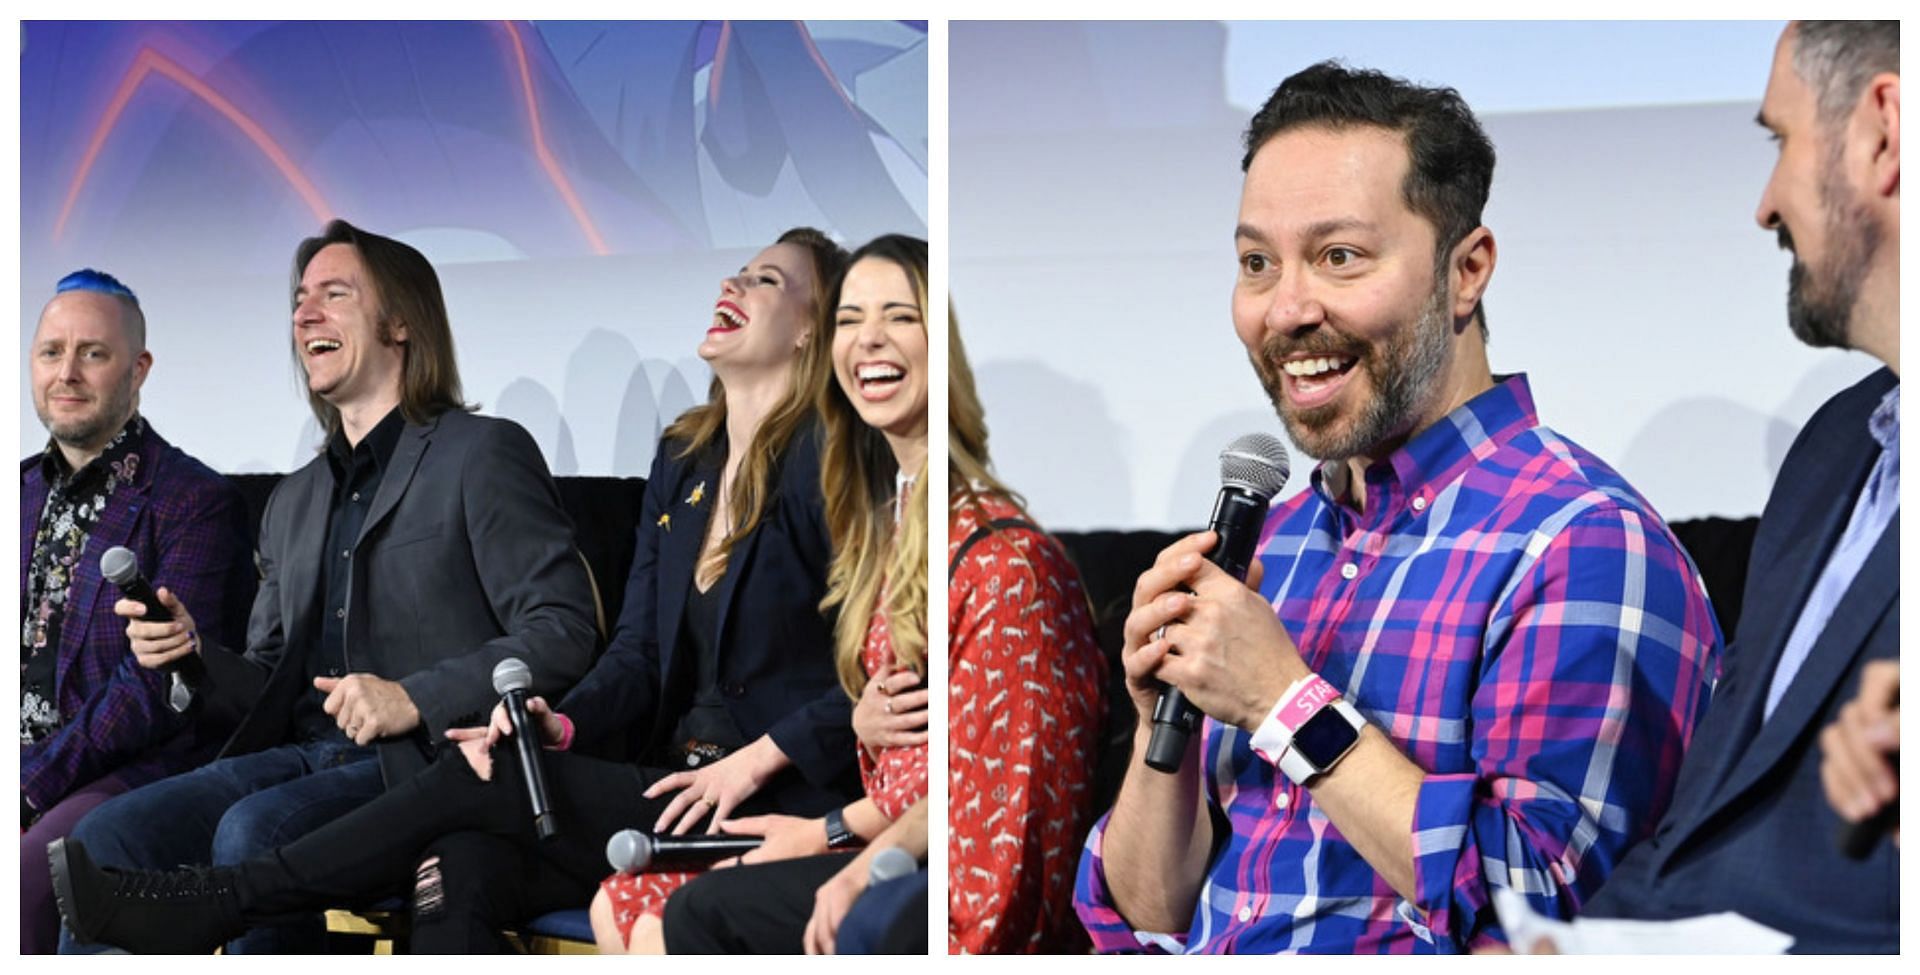 The Legend of Vox Machina cast (photos provided courtesy of Amazon Prime Video)